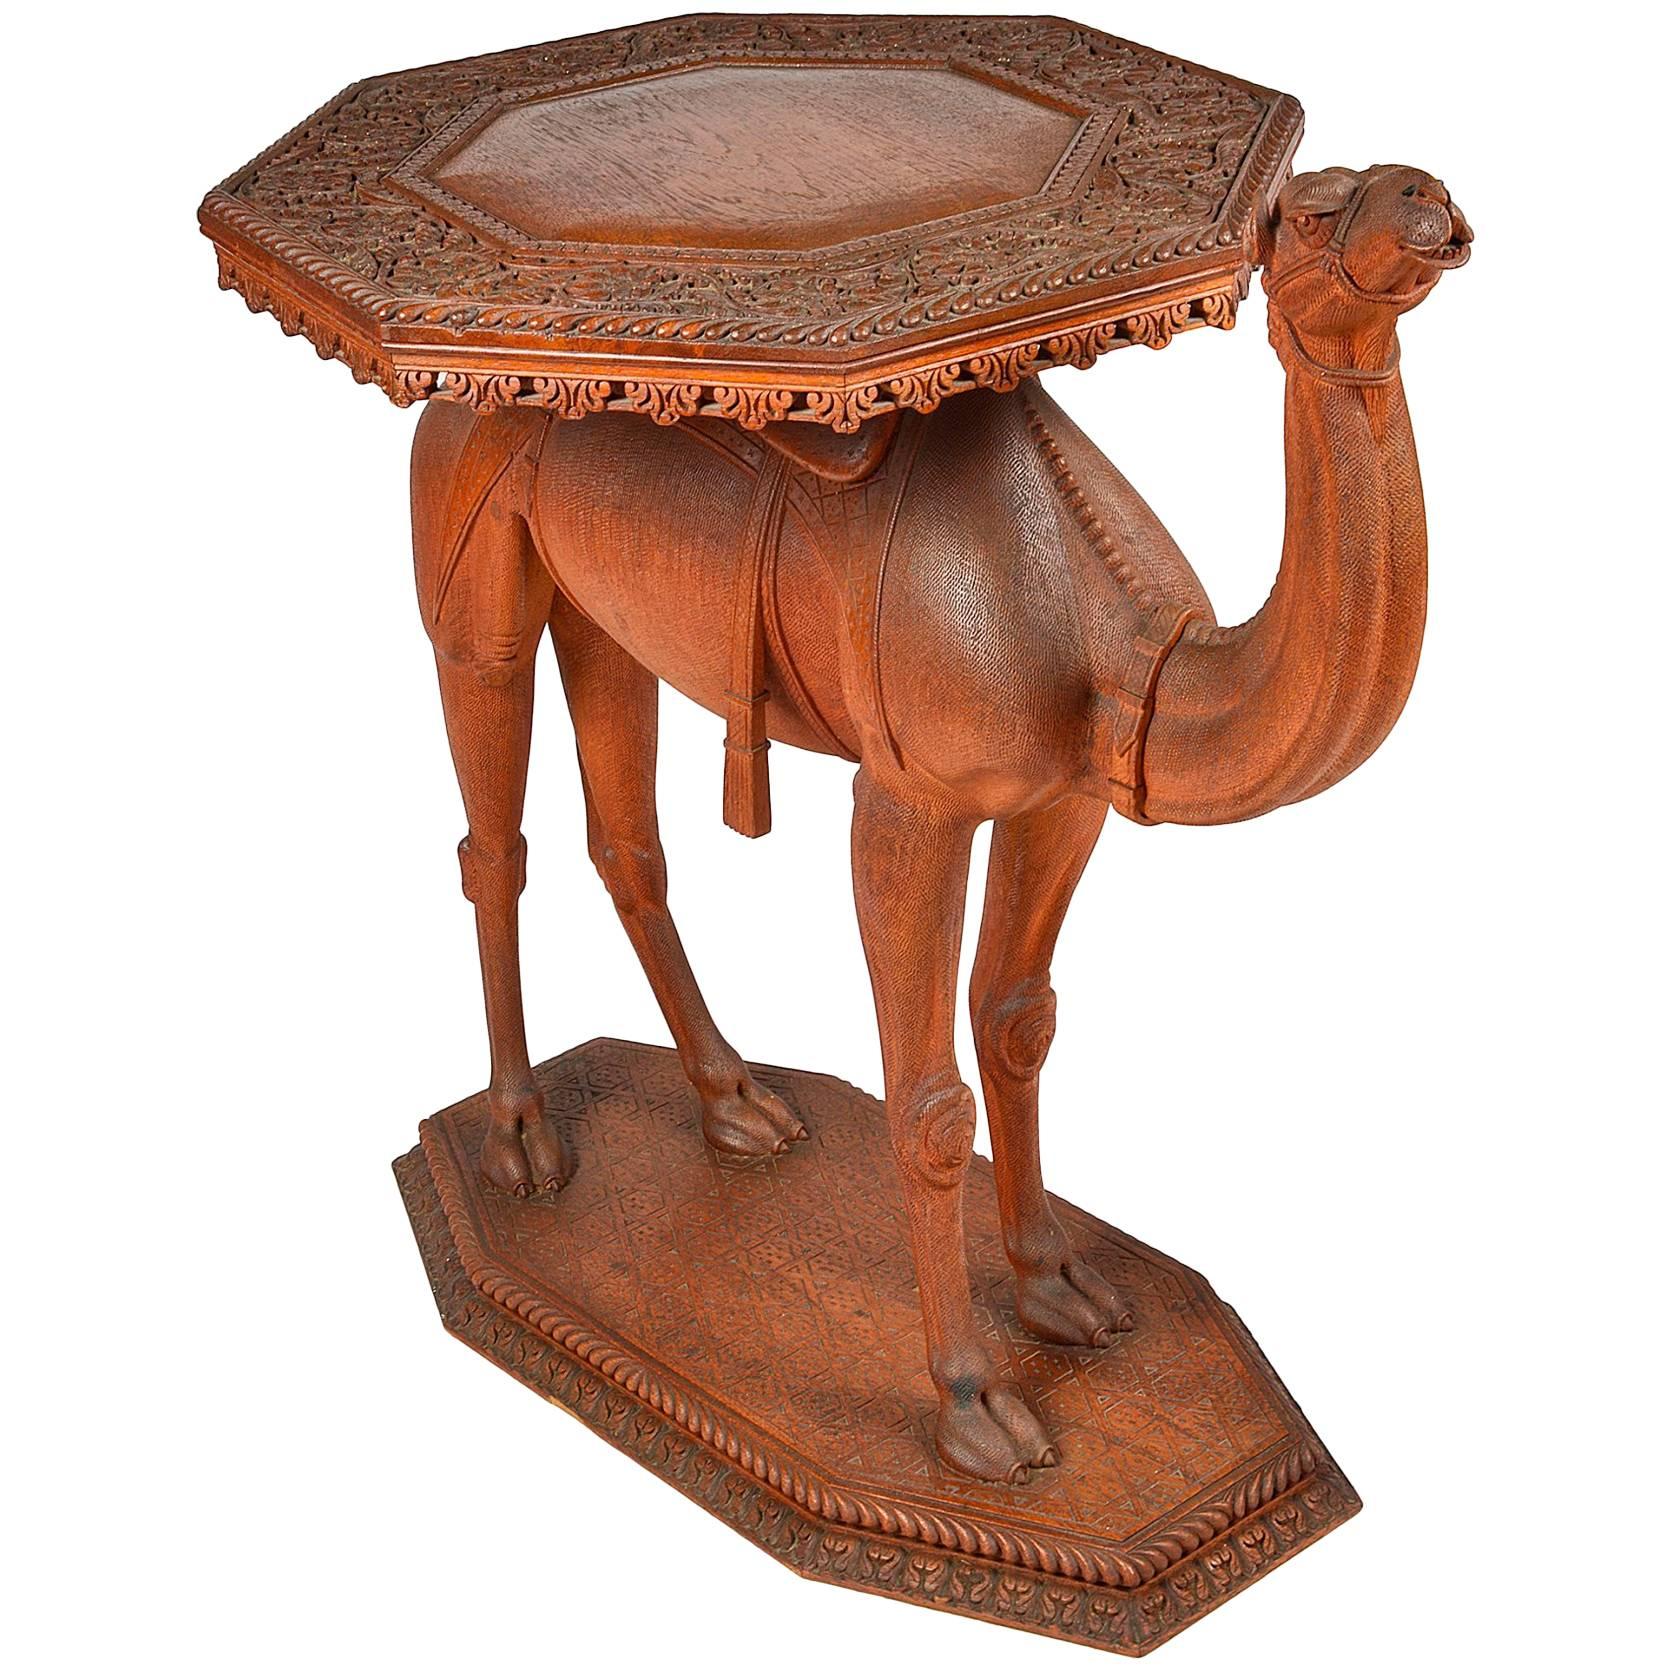 Anglo-Indian Carved Camel Table, 19th Century